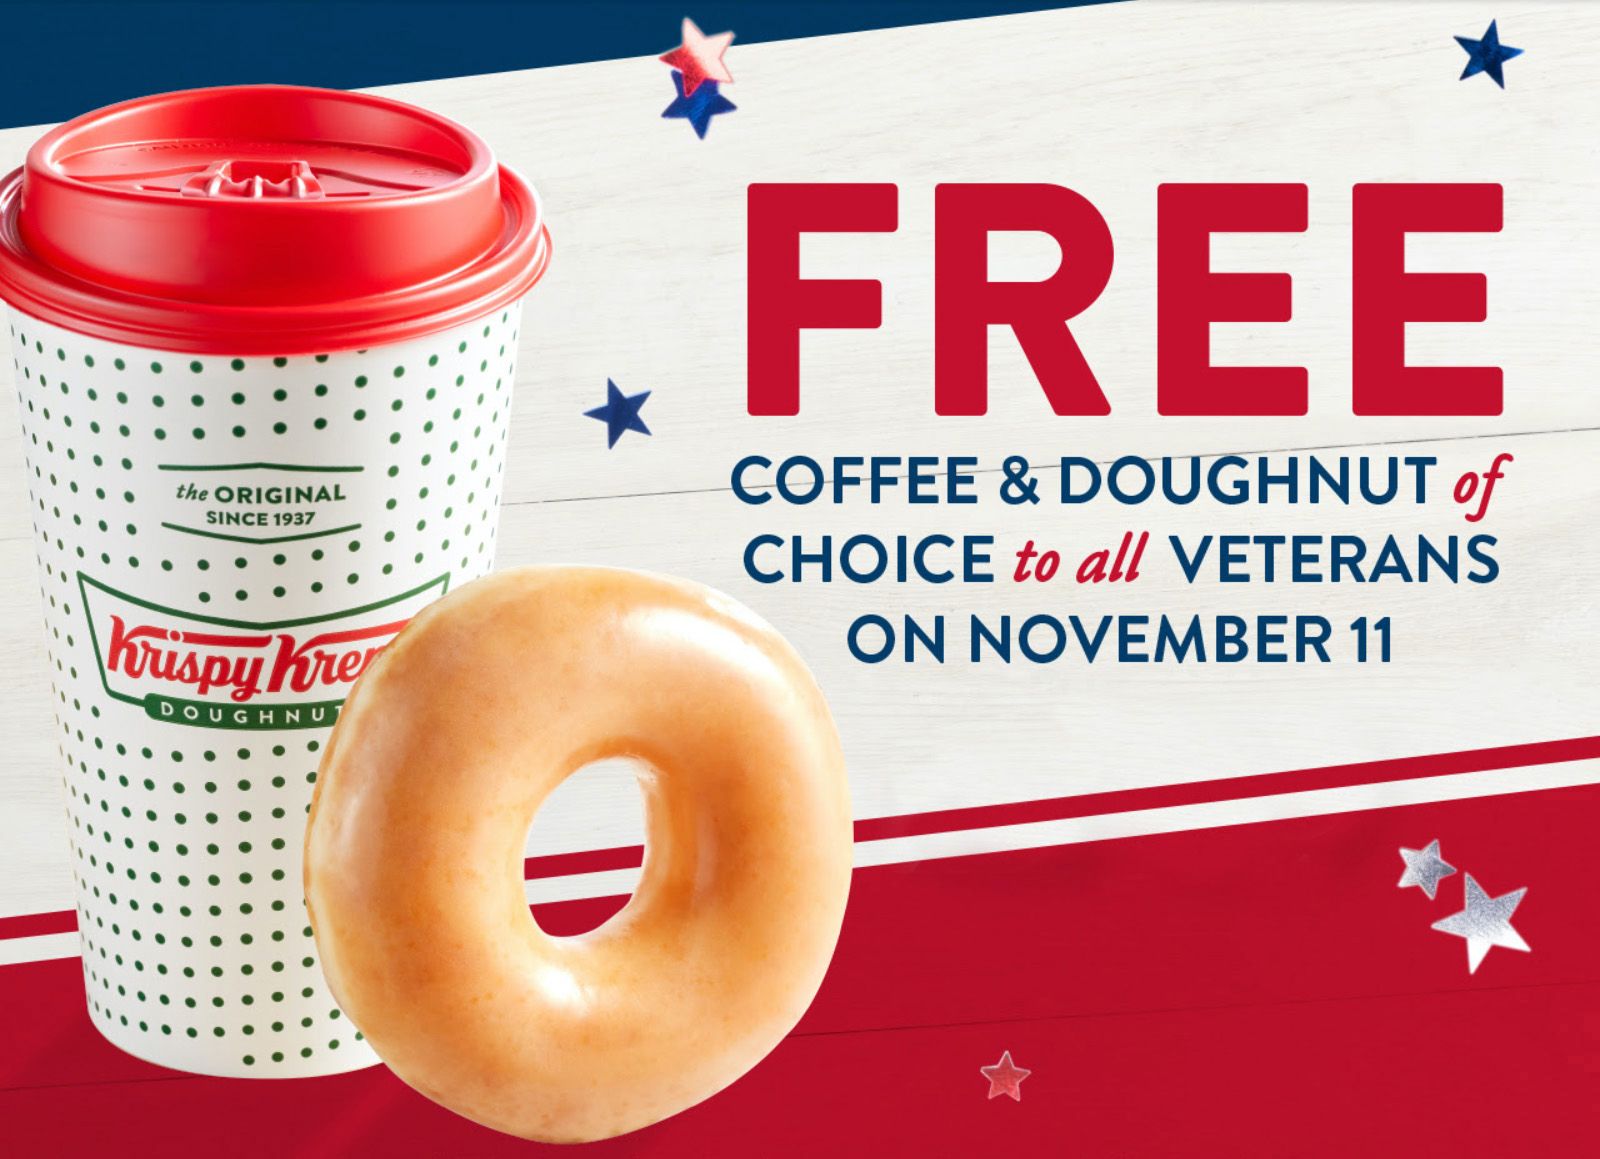 Veterans Will Receive a Free Brewed Coffee and Doughnut In-shop at Krispy Kreme on November 11